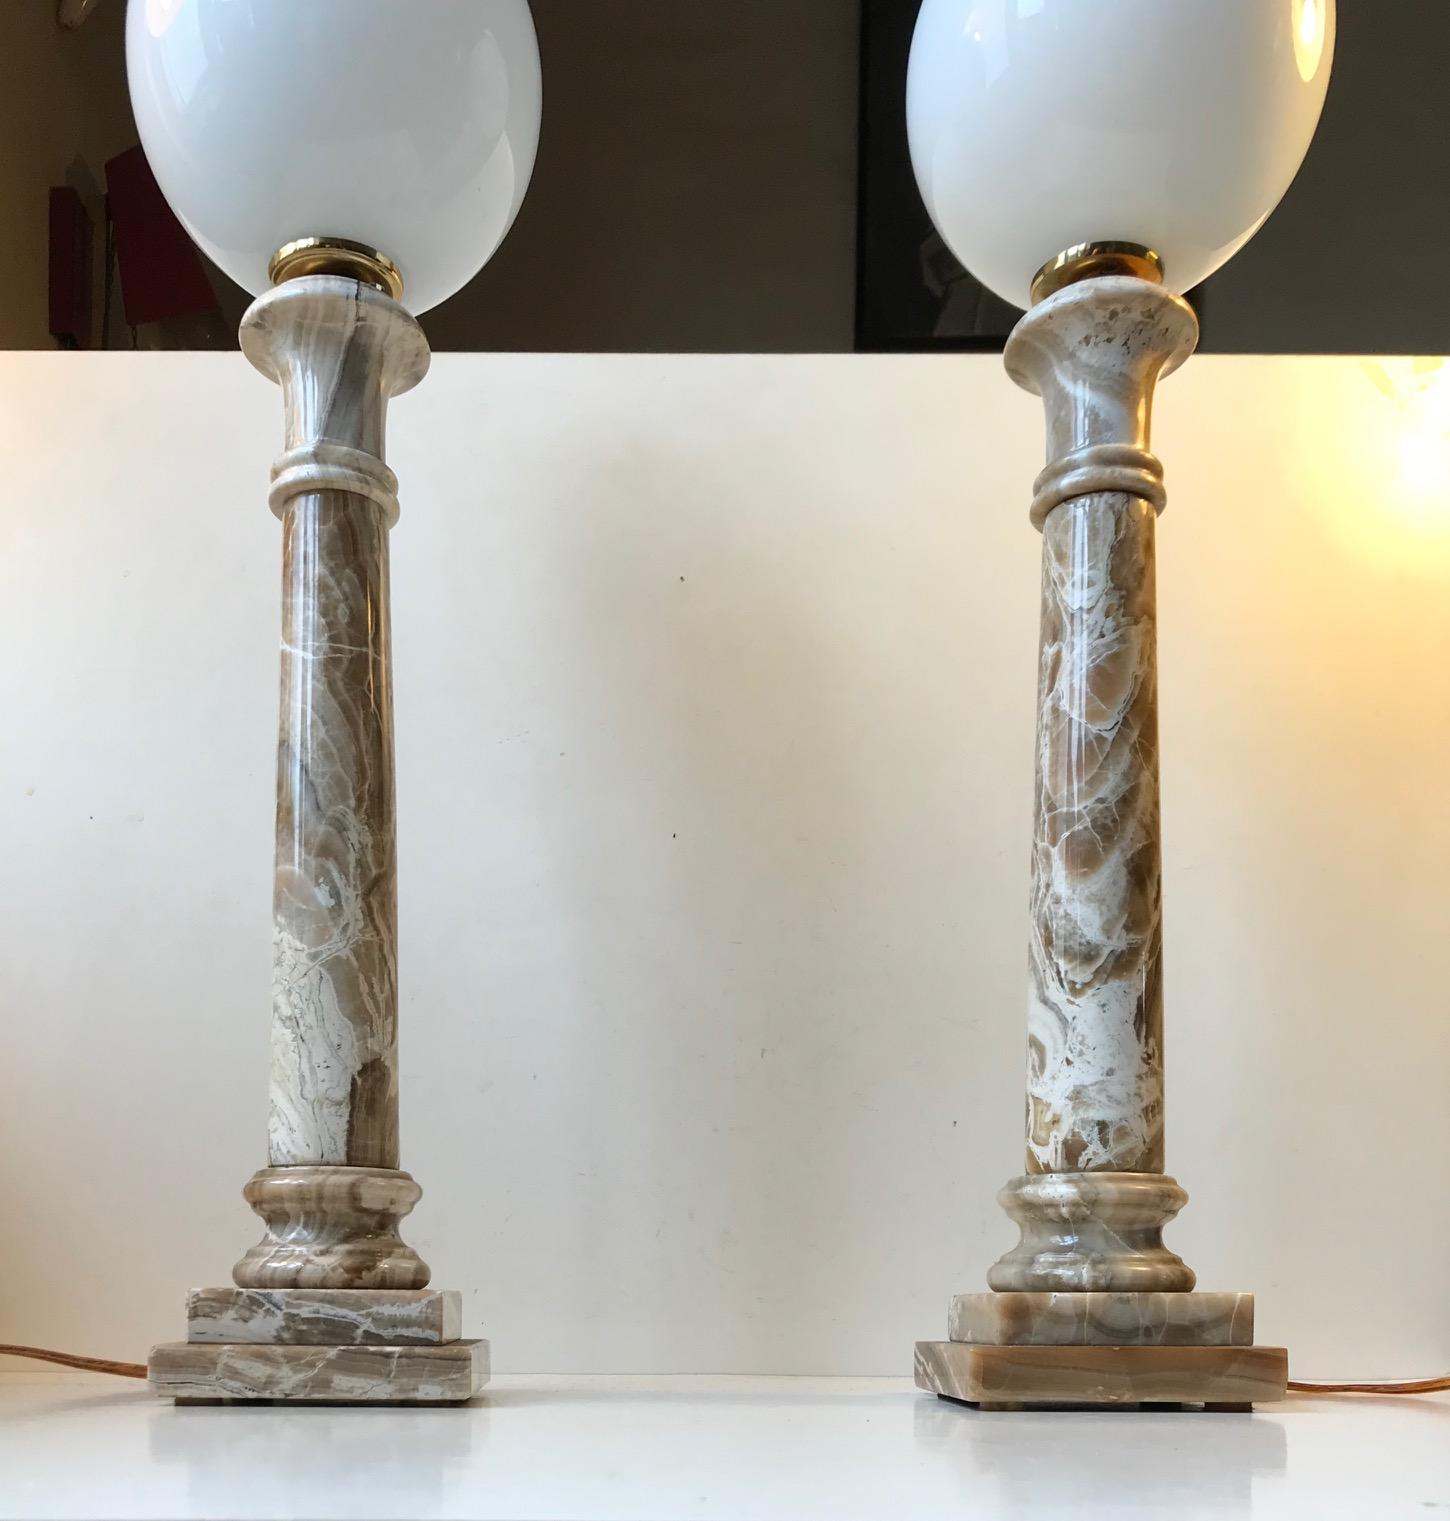 A pair of matching Art Deco revival onyx art table lamps. The shape resembles architectural columns. This type on onyx marble resembles Travetine. They are mounted with matching opaline glass spheres. These were made by hand in Italy during the